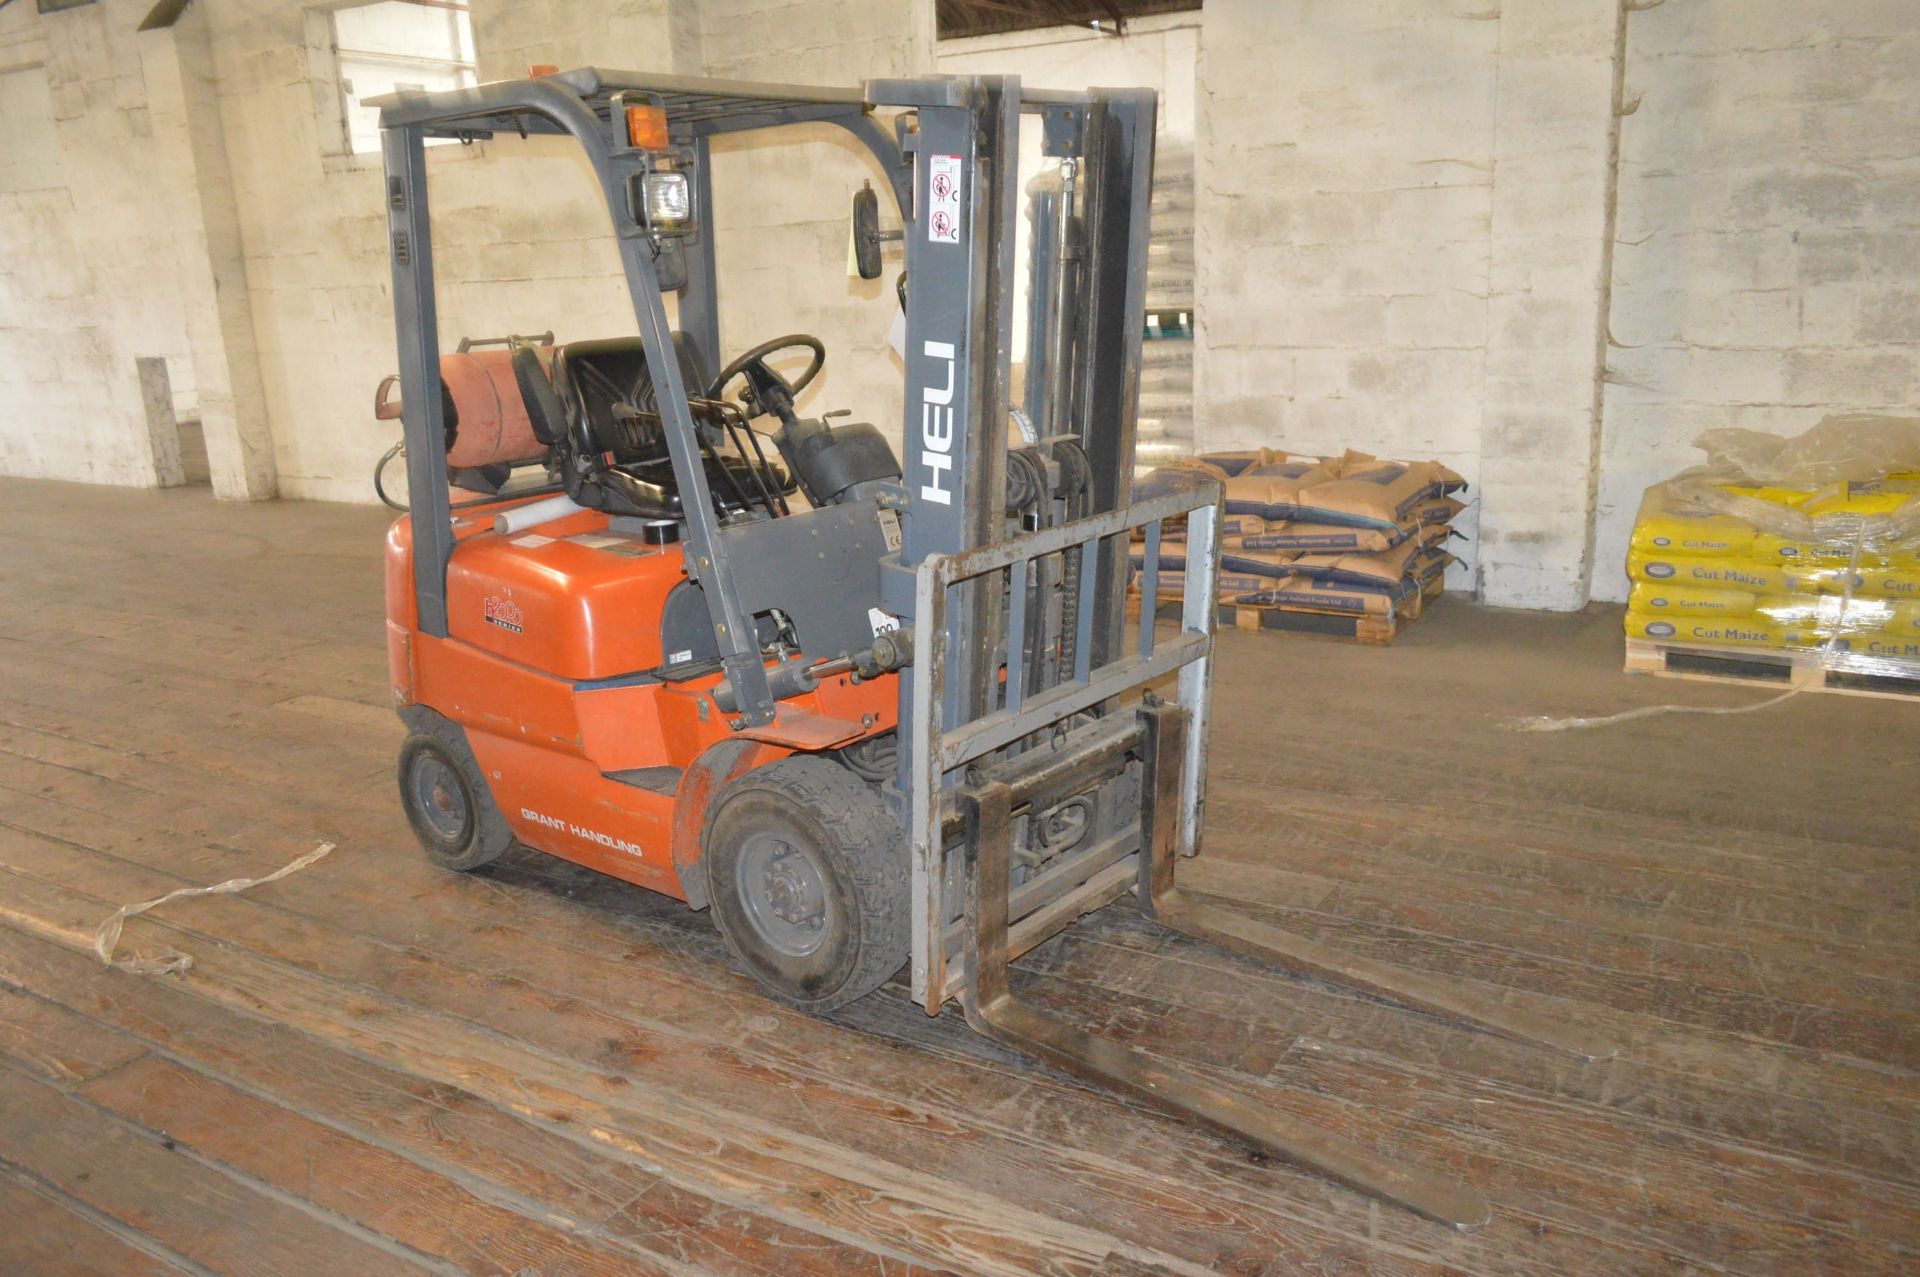 Heli HFG15 H2000 SERIES 1500kg LPG ENGINE FORK LIFT TRUCK, serial no. 78330, year of manufacture